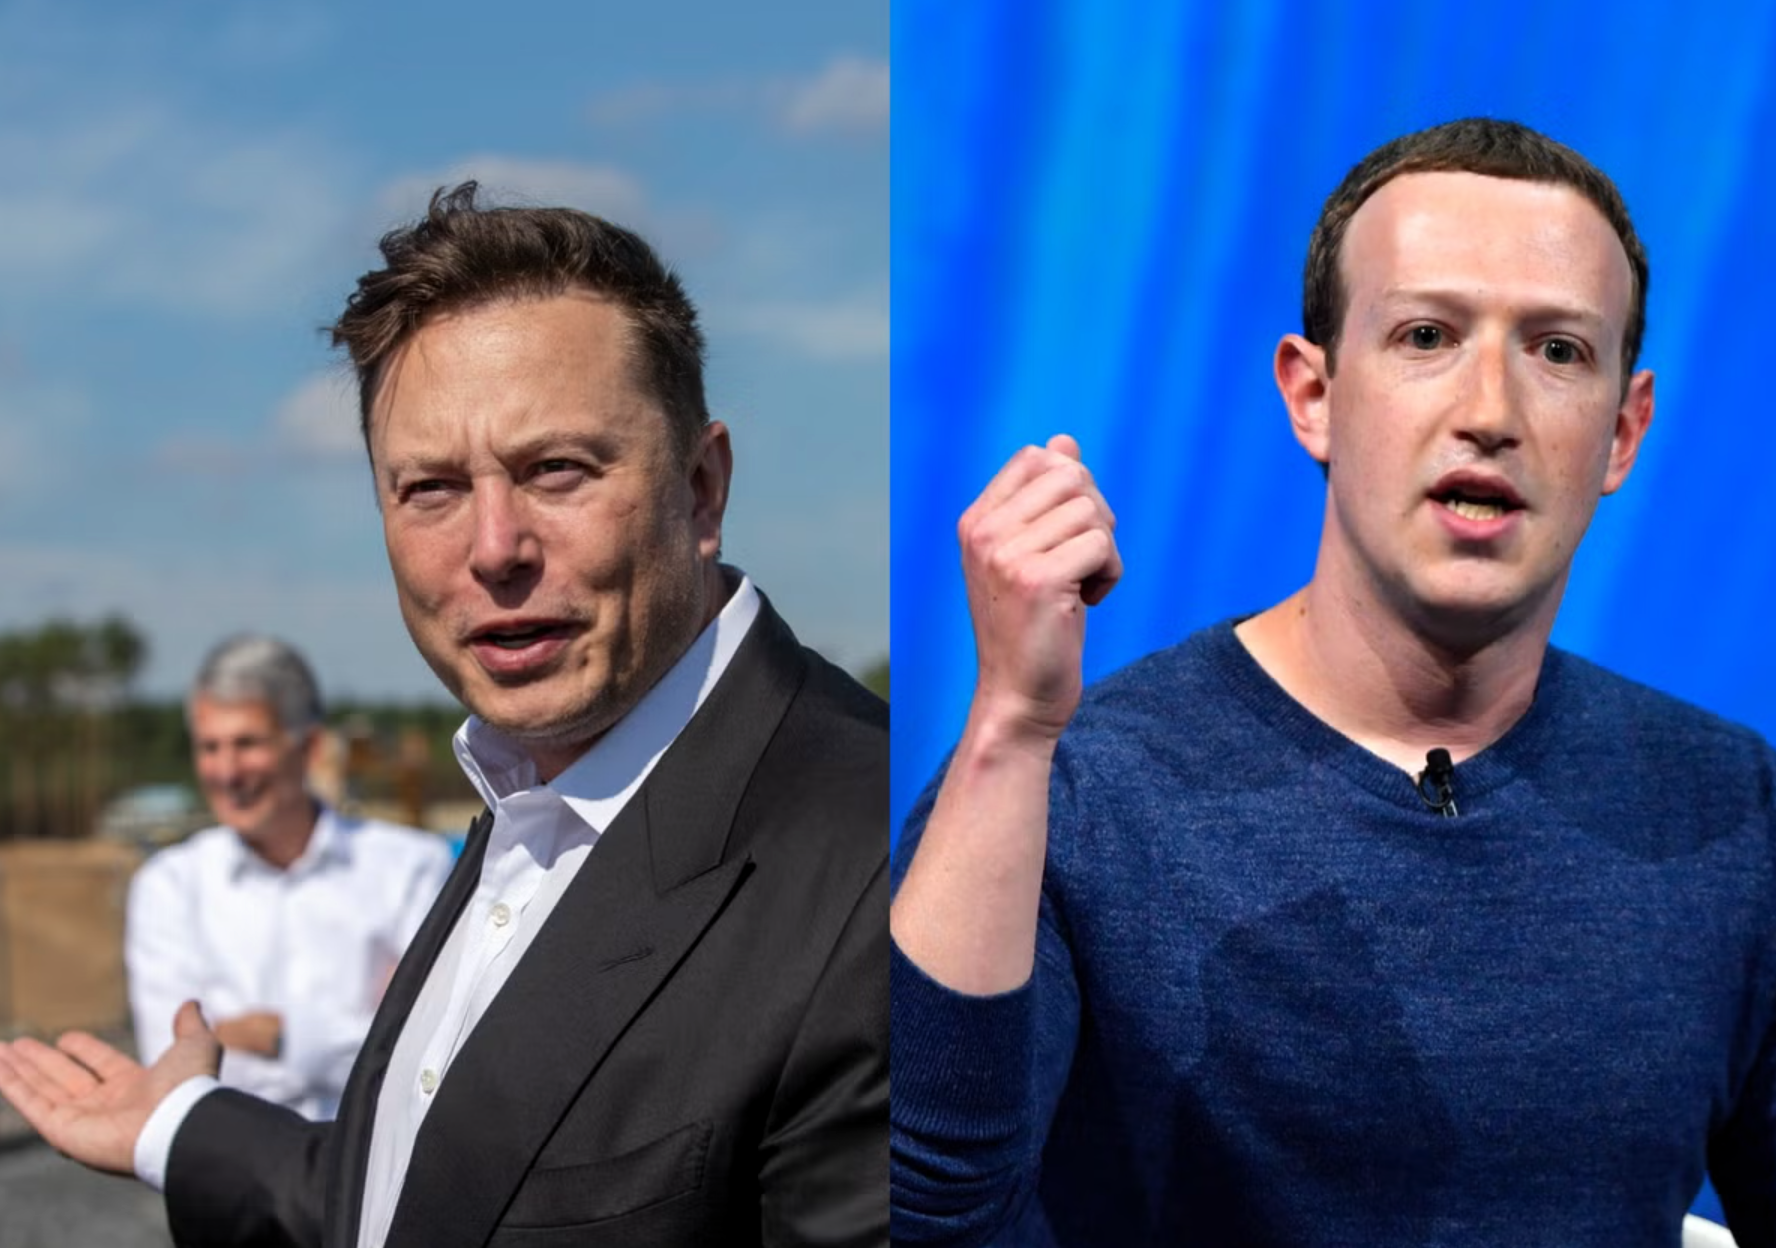 Packing a punch: Elon Musk and Mark Zuckerberg have a combined net worth of $335bn